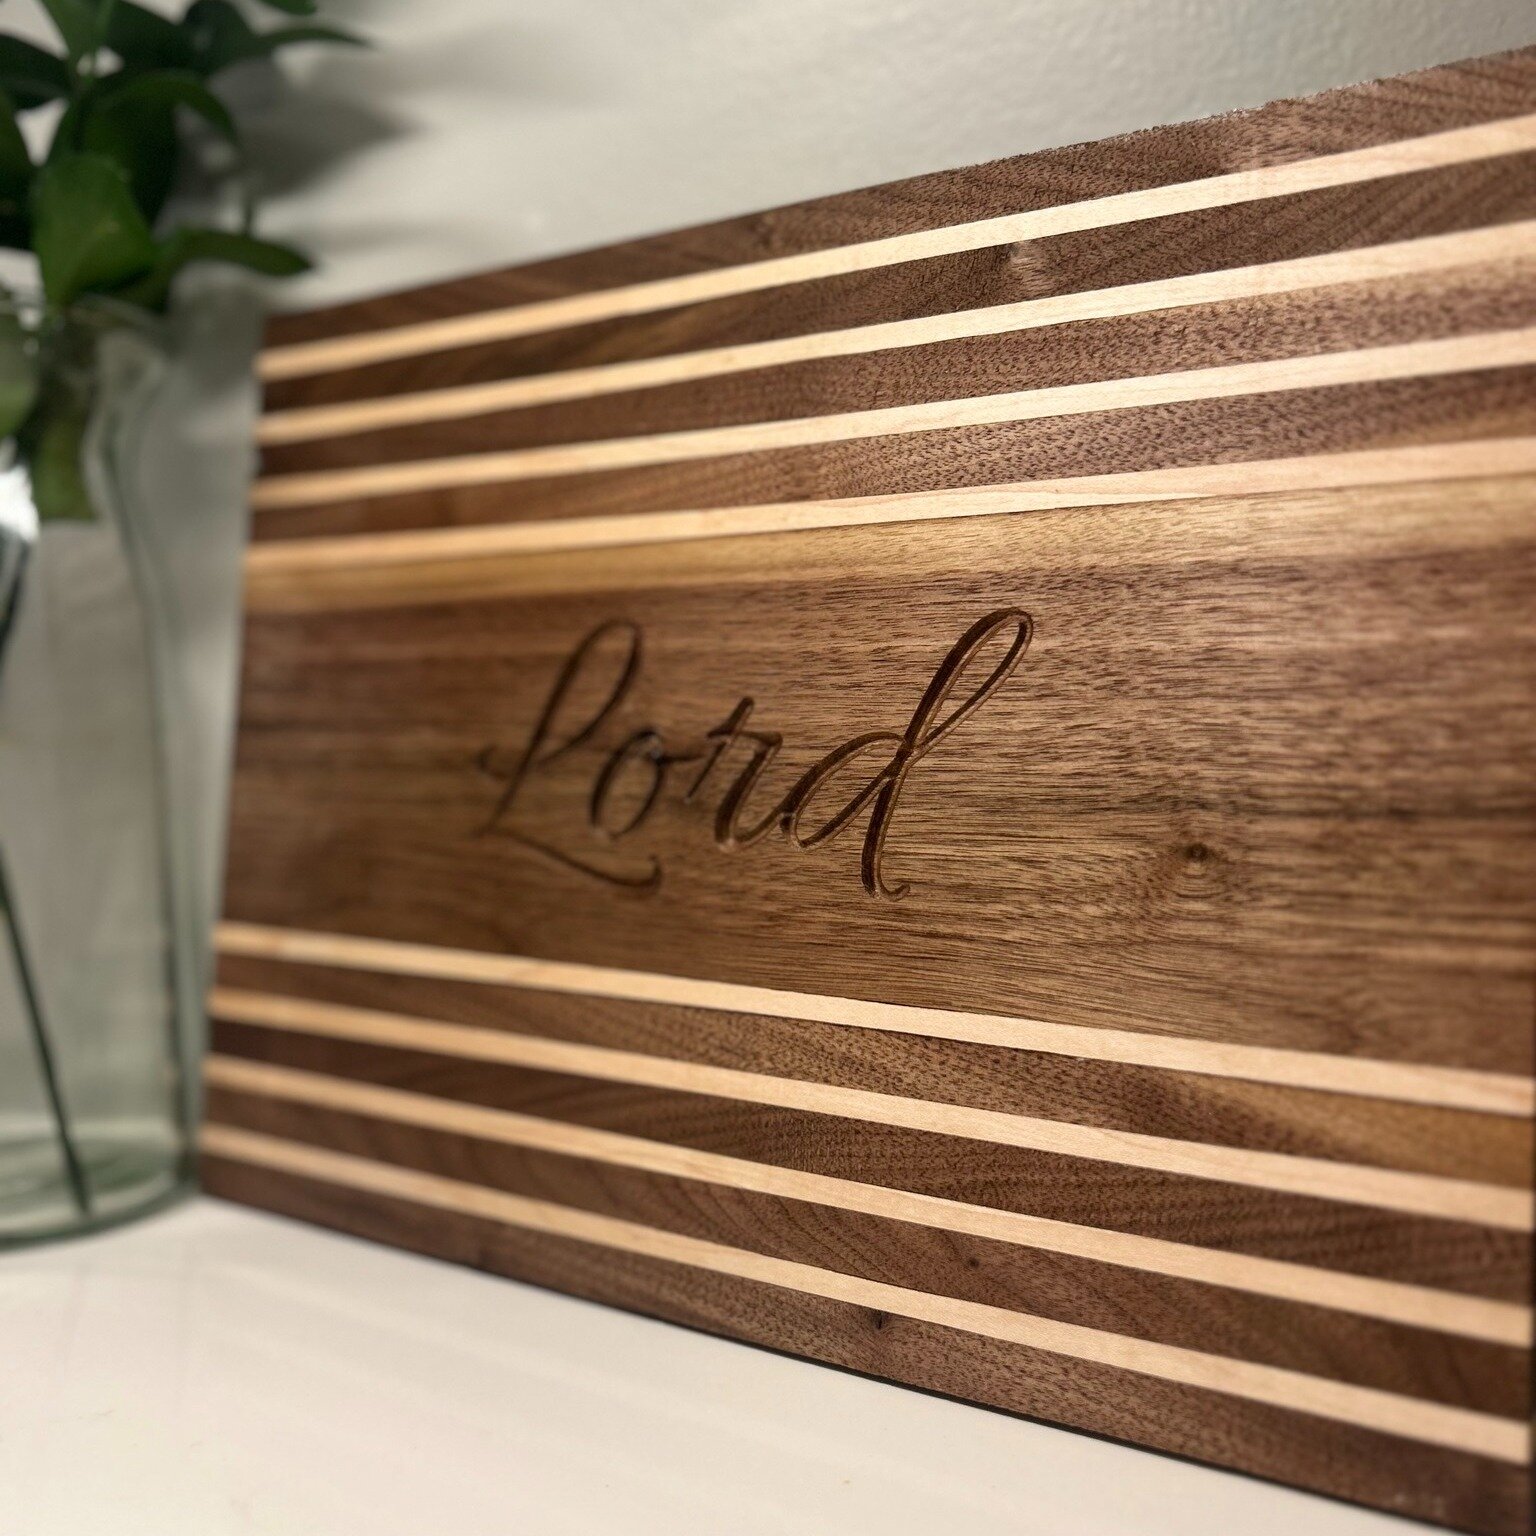 The possibilities with these cutting and serving boards designs are endless! One of the many we've wrapped up lately.. These make great gifts and are perfect for the newlyweds!